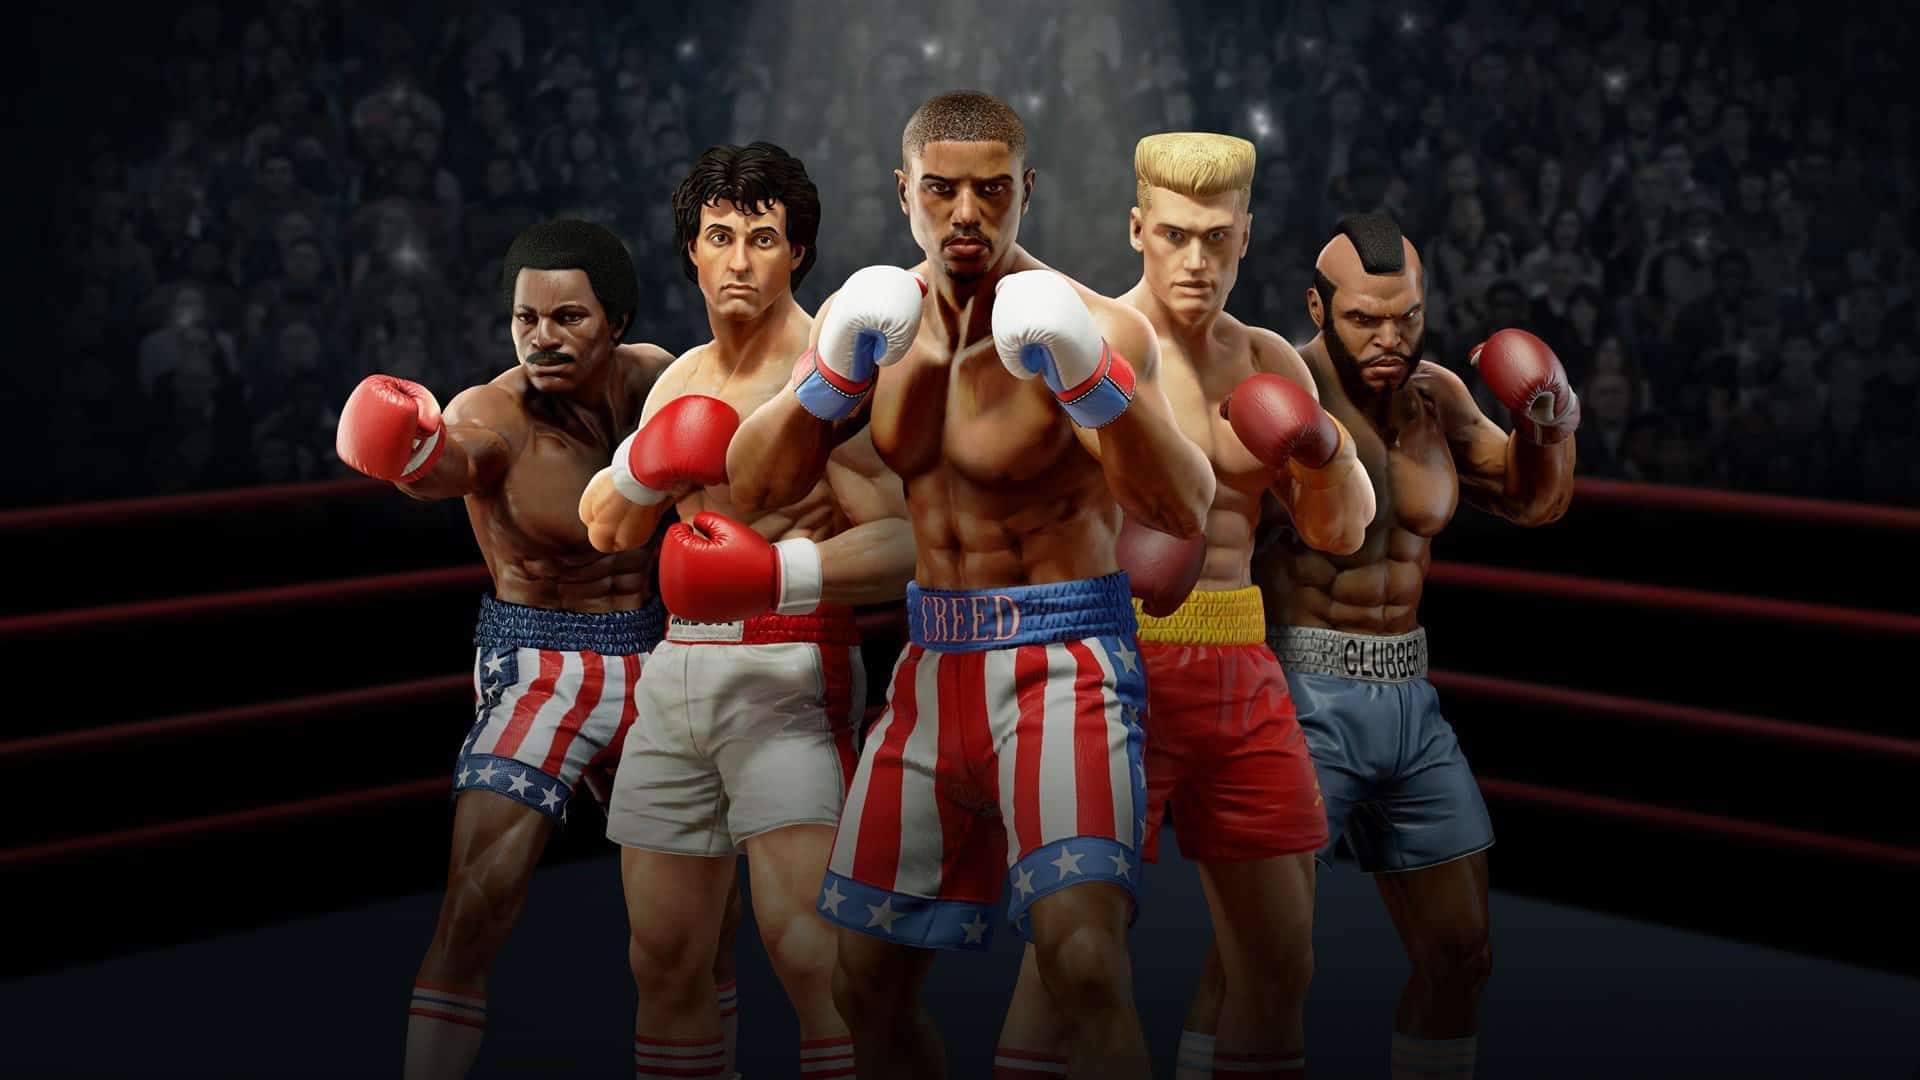 Creed Champions new trailer shows off new characters